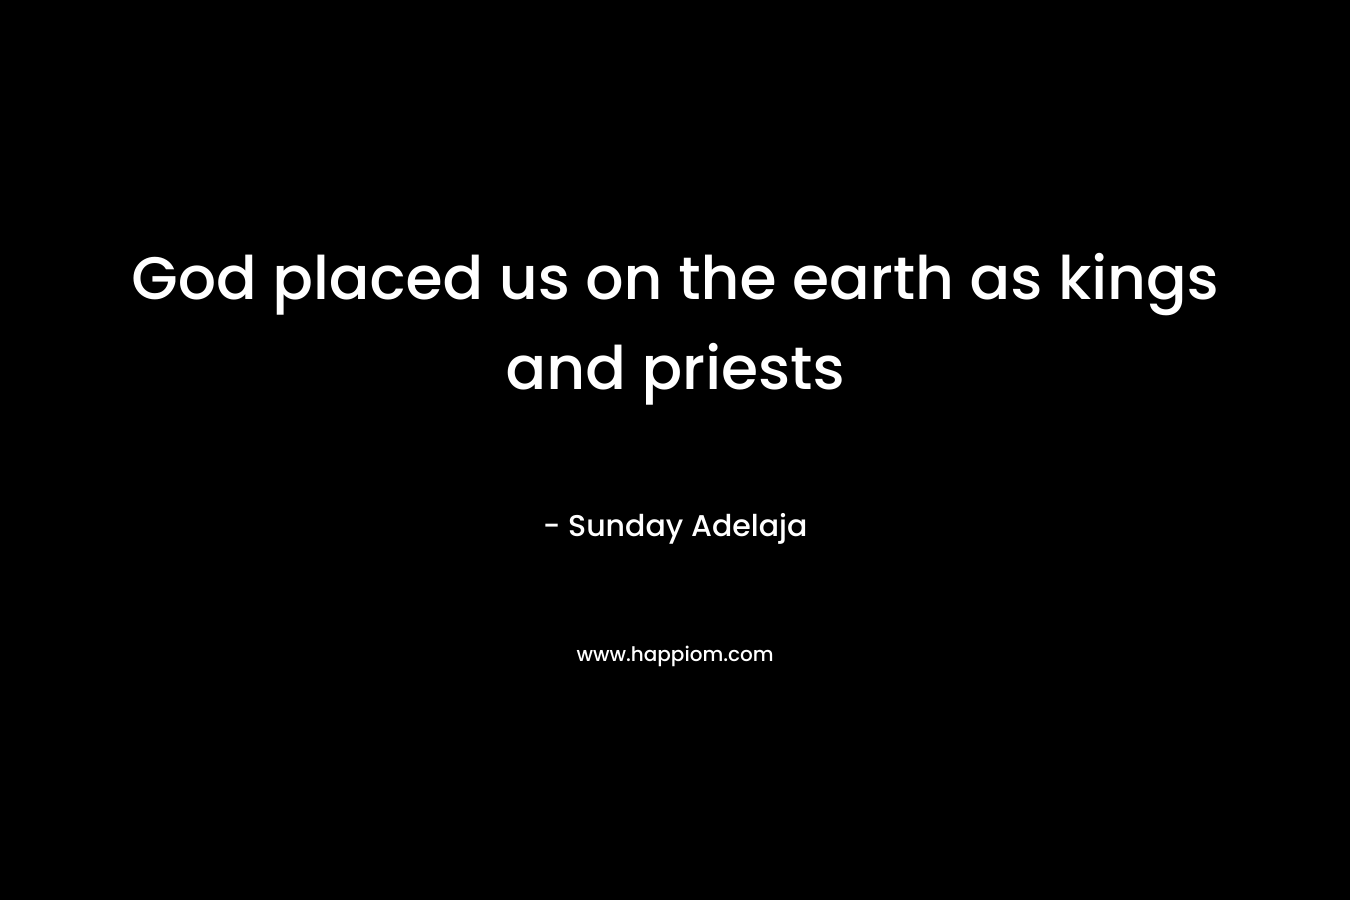 God placed us on the earth as kings and priests